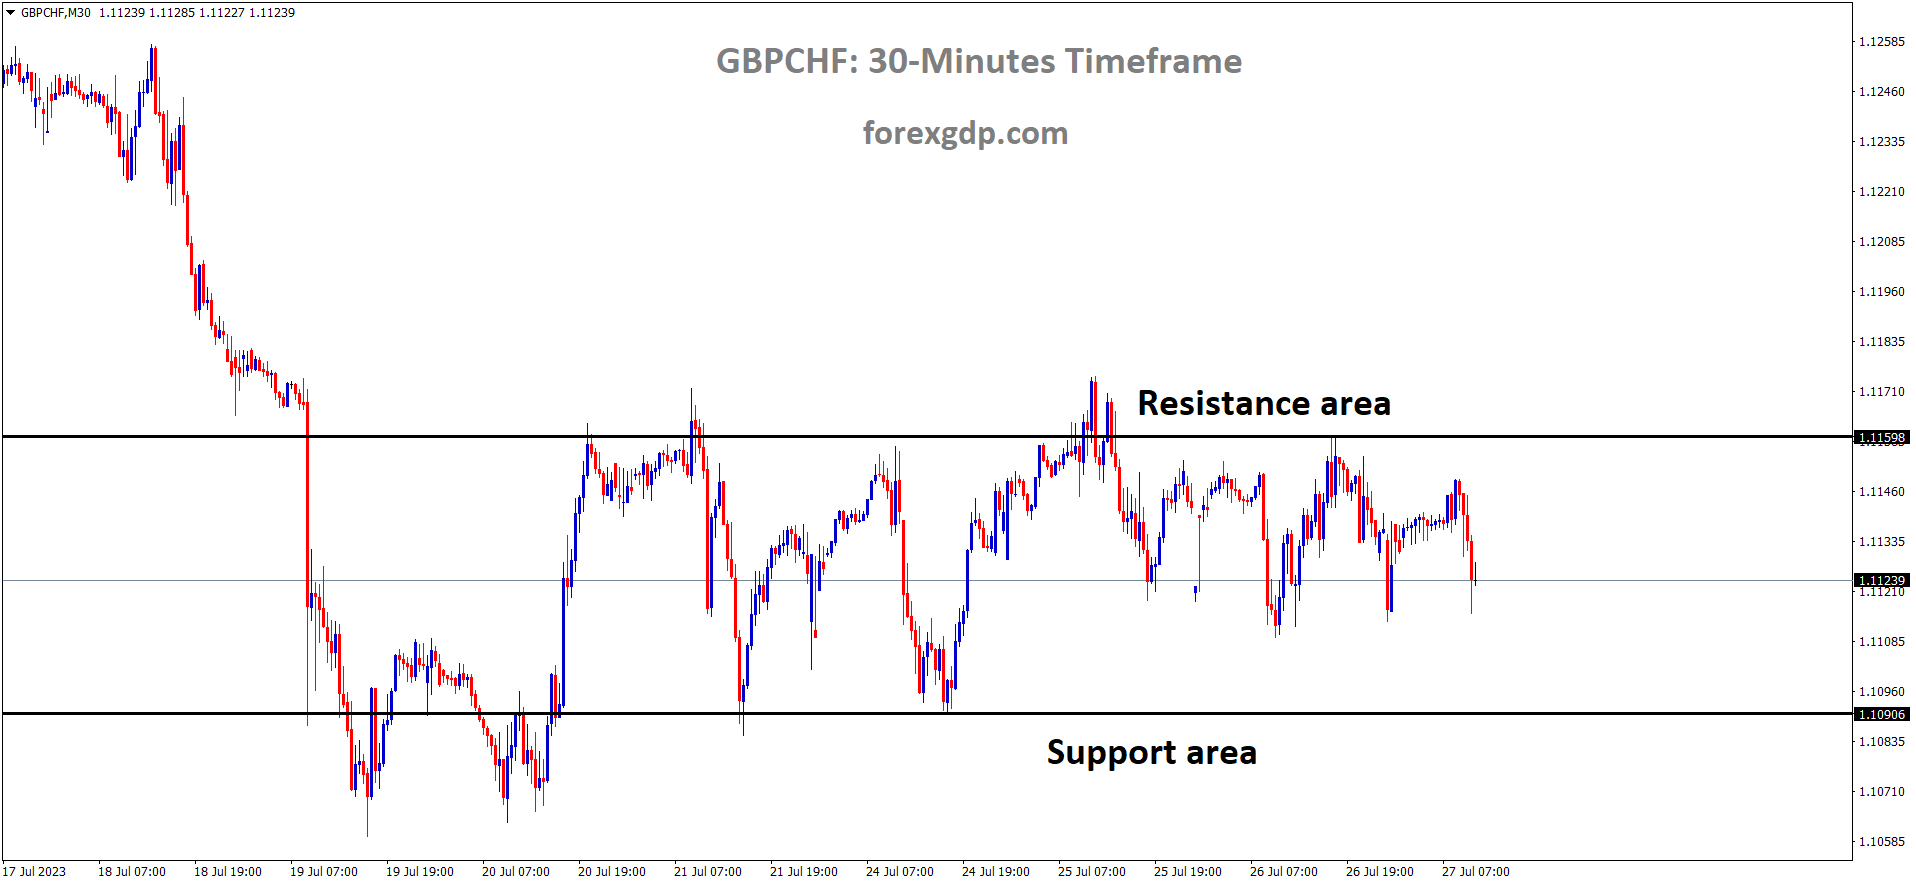 GBPCHF is moving in the Box pattern and the market has fallen from the resistance area of the pattern 1